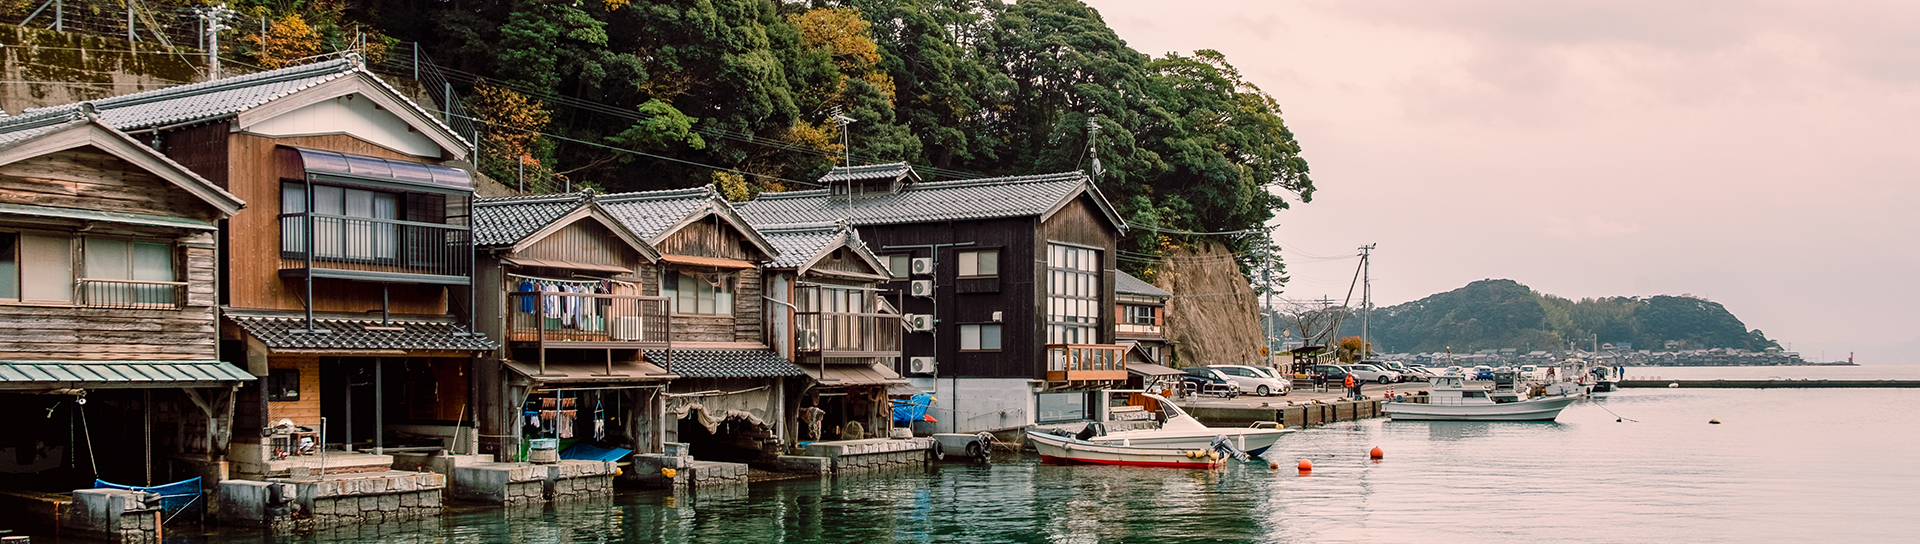 several houses with boats along the ocean